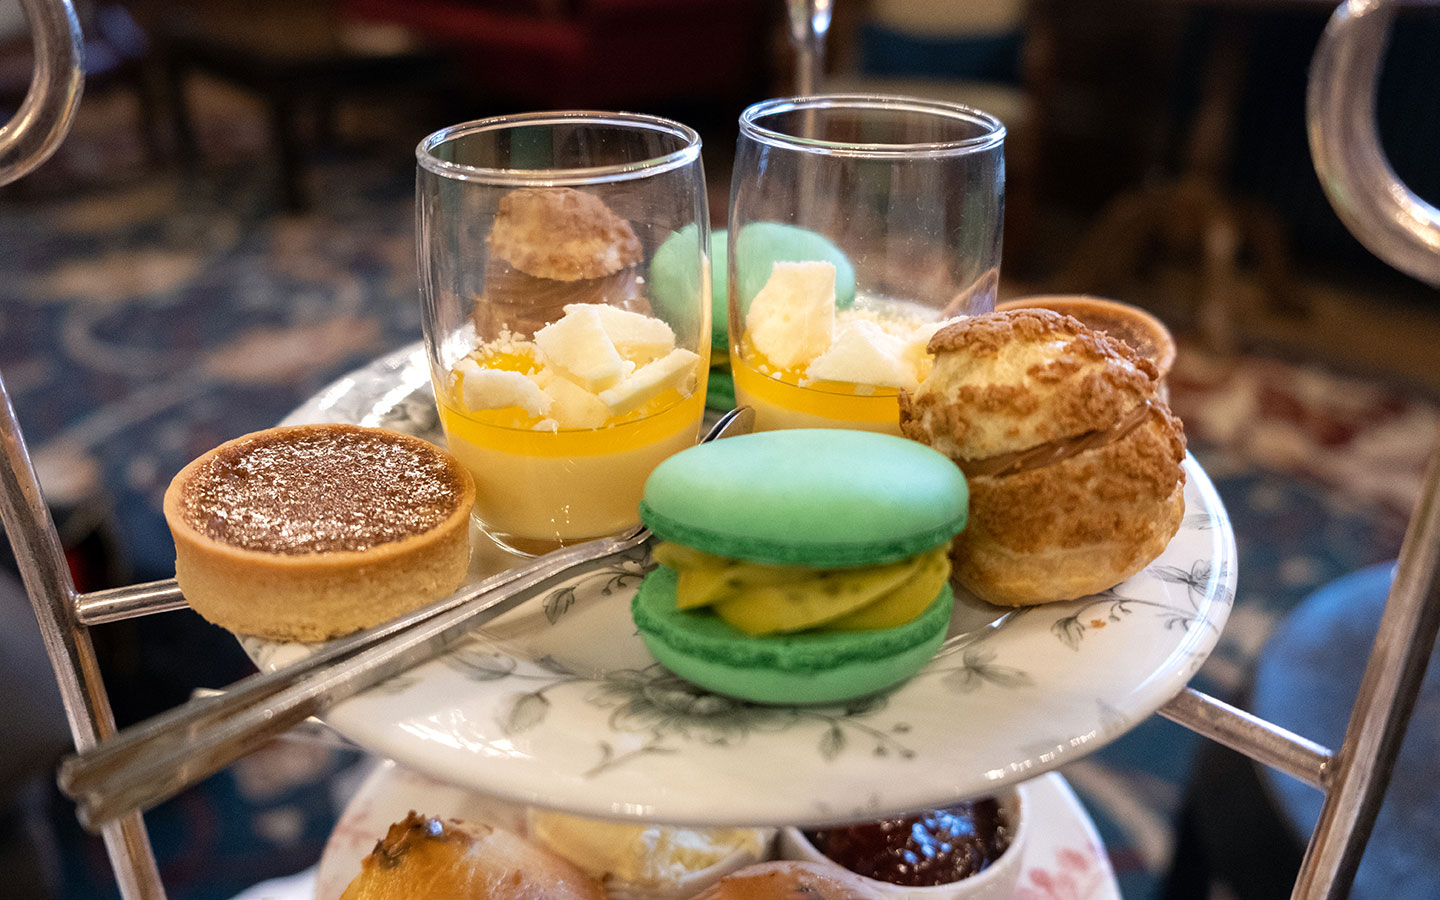 Afternoon tea at Ellenborough Park in the Cotswolds